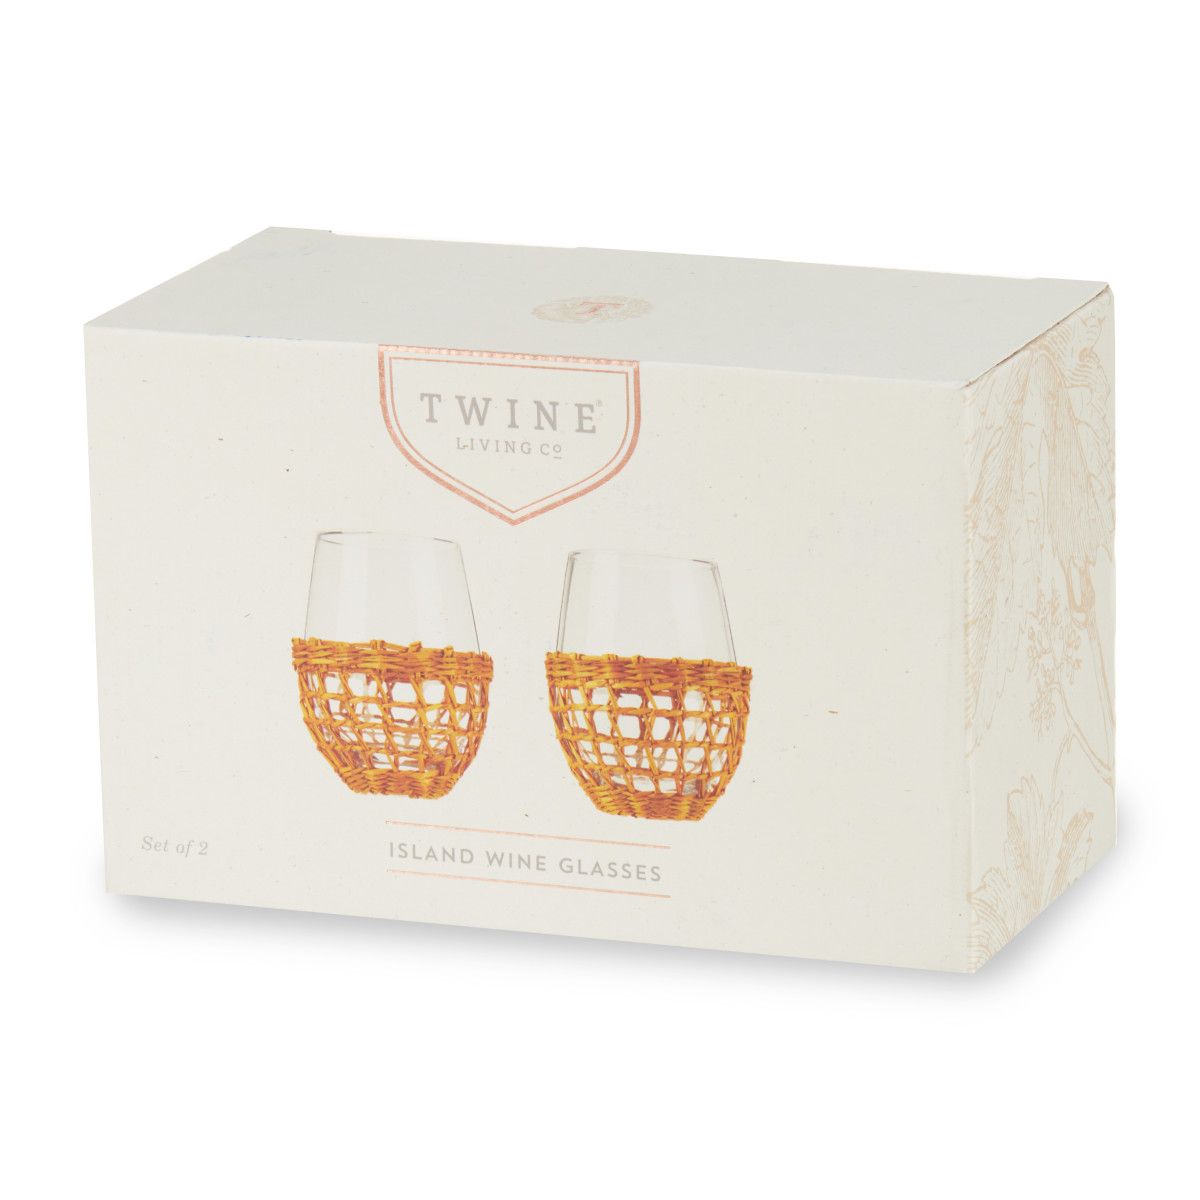 Twine Island Wine Glasses, Stemless Glassware with Seagrass Wrap Cover for  Drinks or Water, Dishwasher Safe, 16 Oz, Set of 2